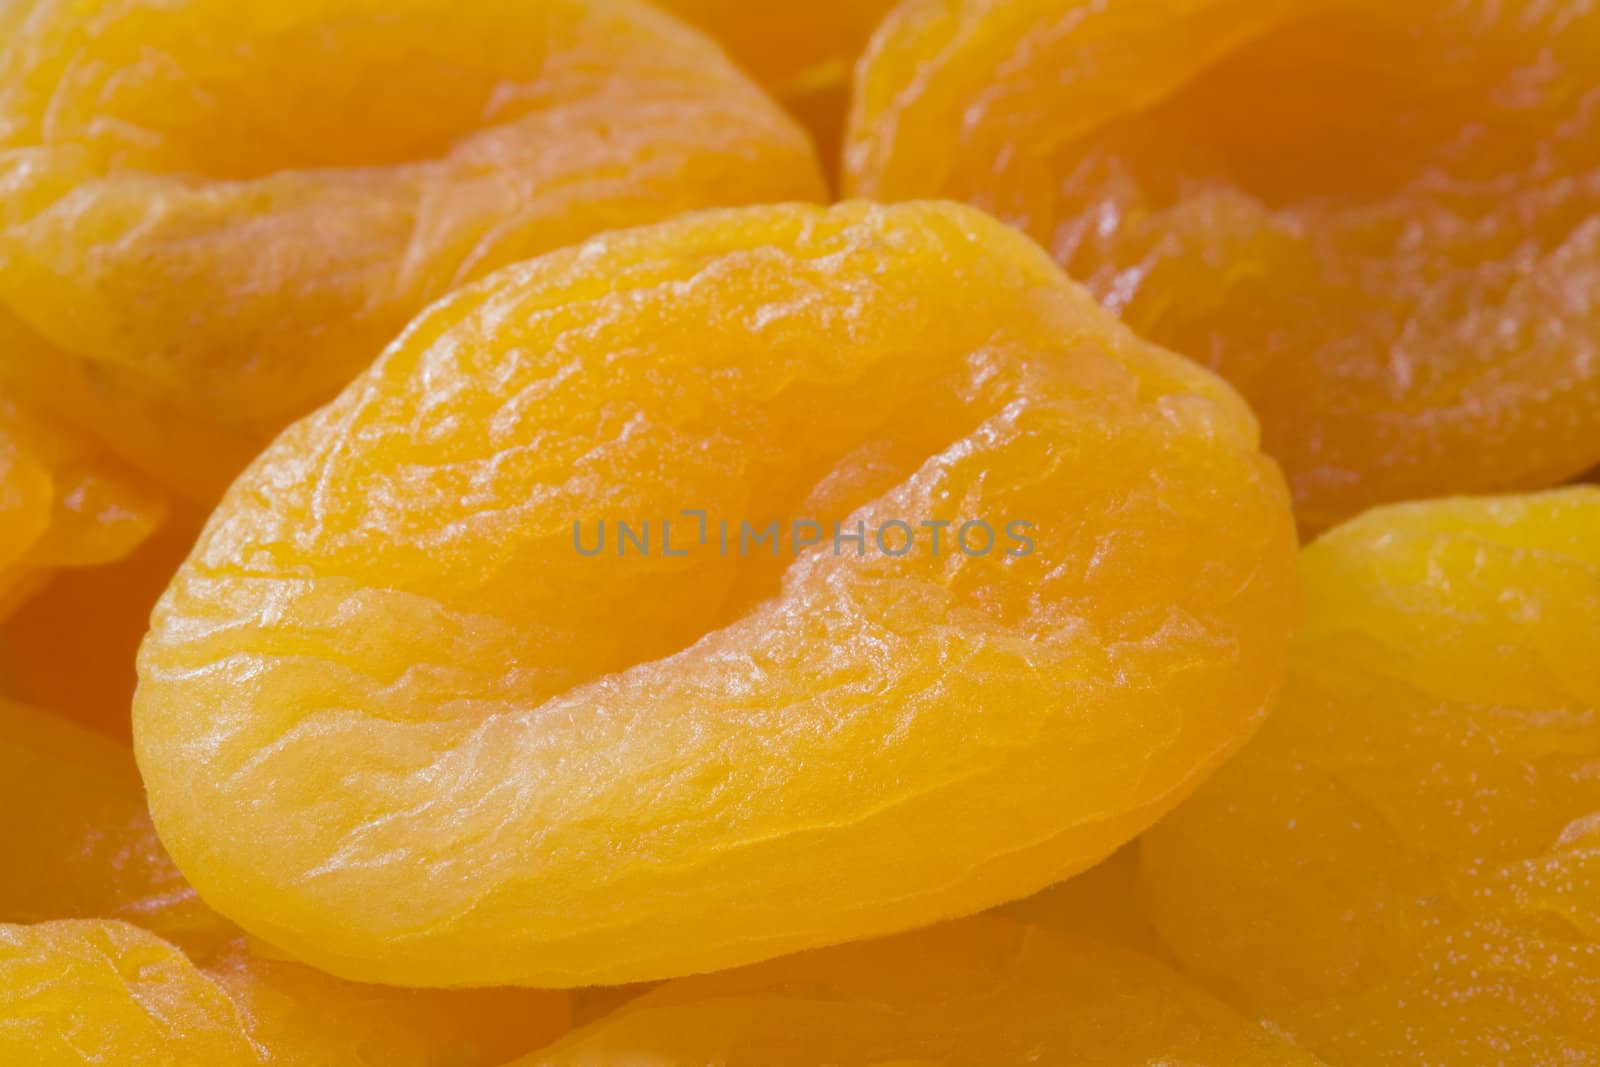 Dried apricots by Gravicapa